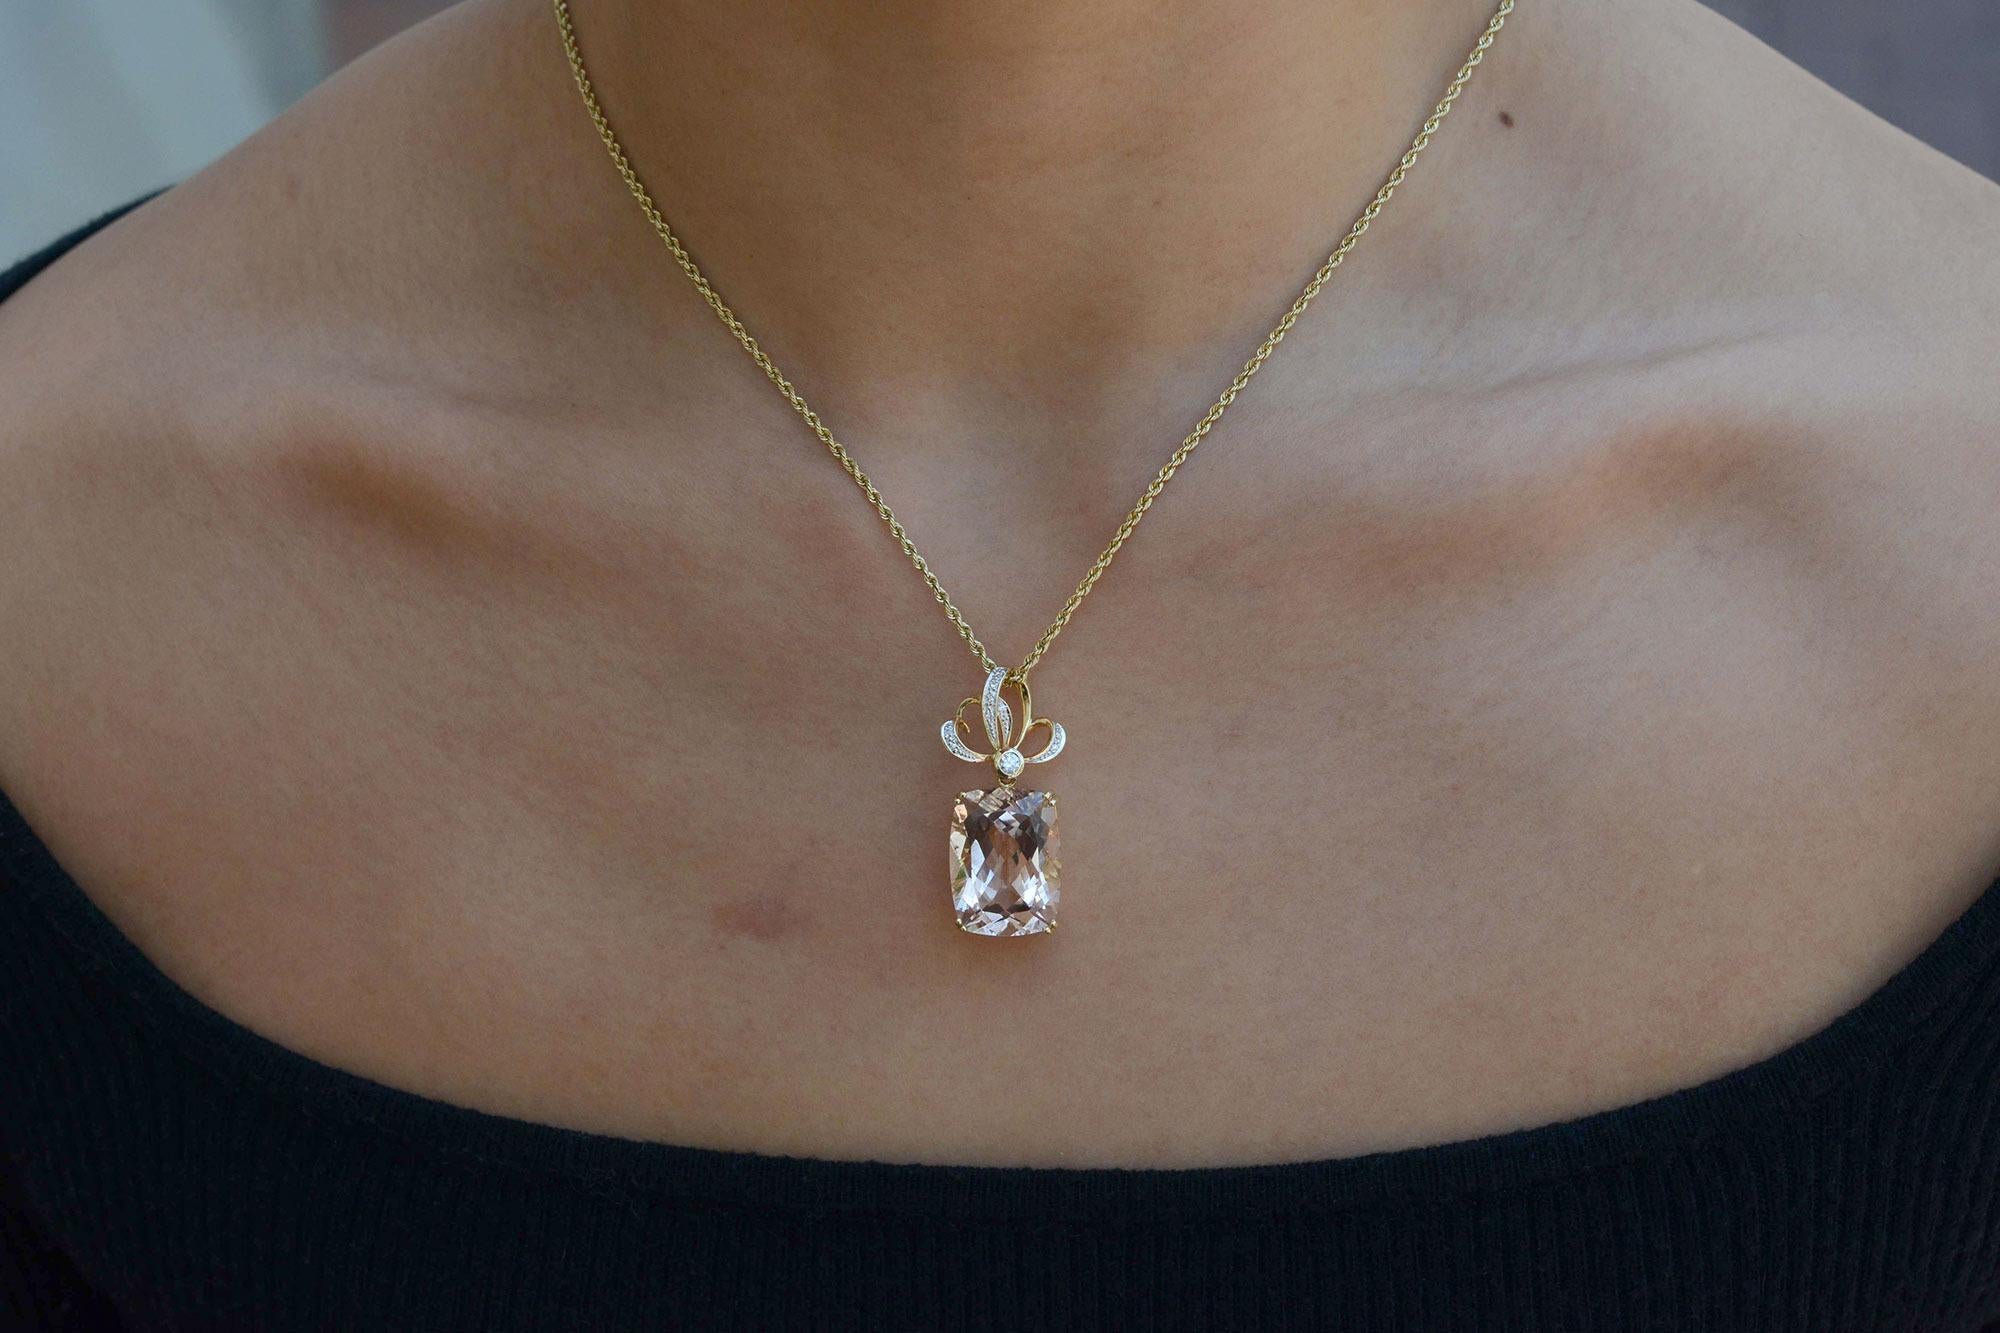 This beautiful 15 carat morganite and diamond pendant necklace is crafted with a modern contemporary style. Suspended below 10 twinkling round diamonds, the exquisite cushion cut gemstone radiates elegance and sophistication with a favorable